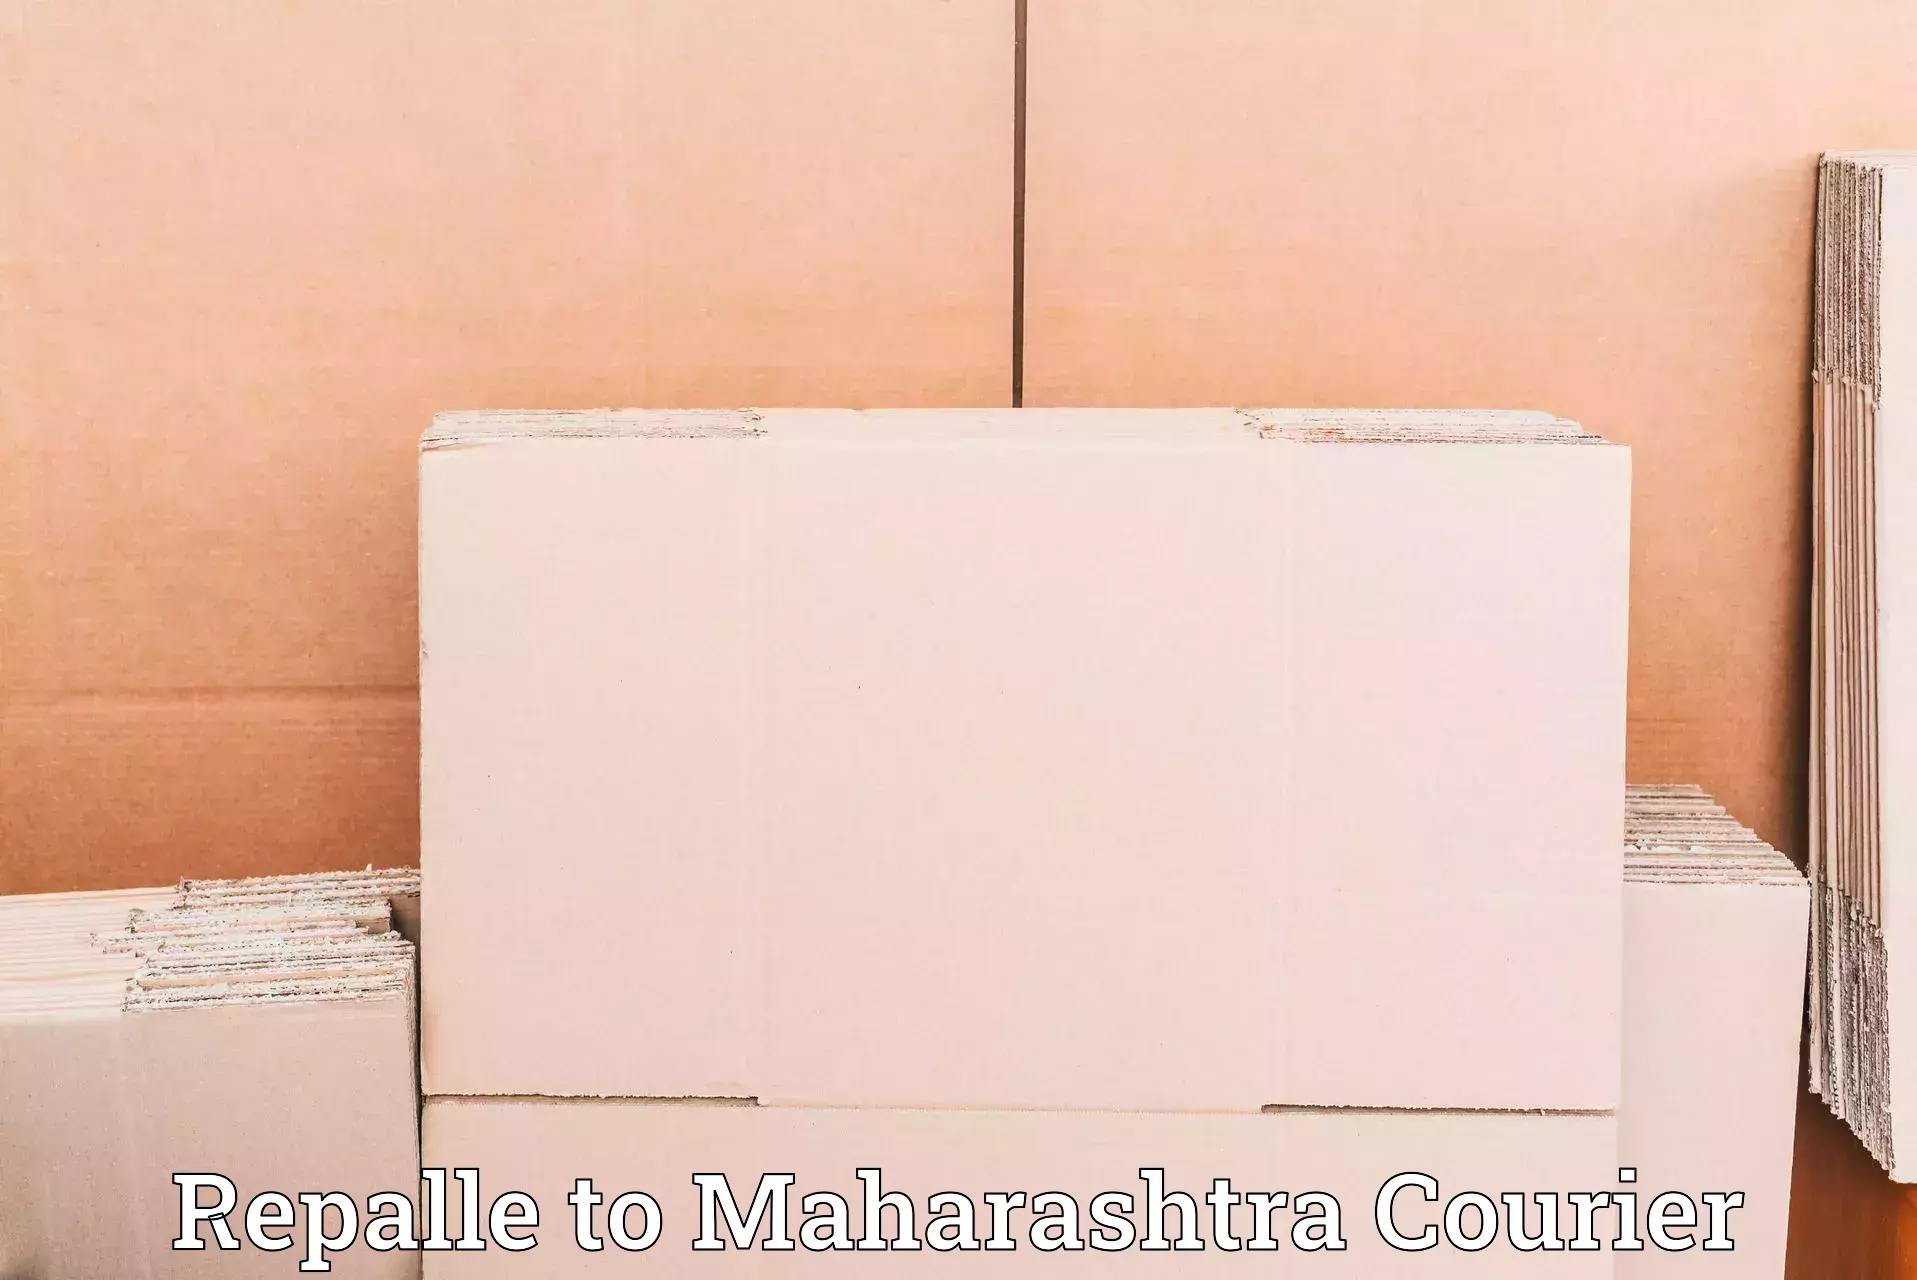 Dynamic courier operations Repalle to DY Patil Vidyapeeth Mumbai